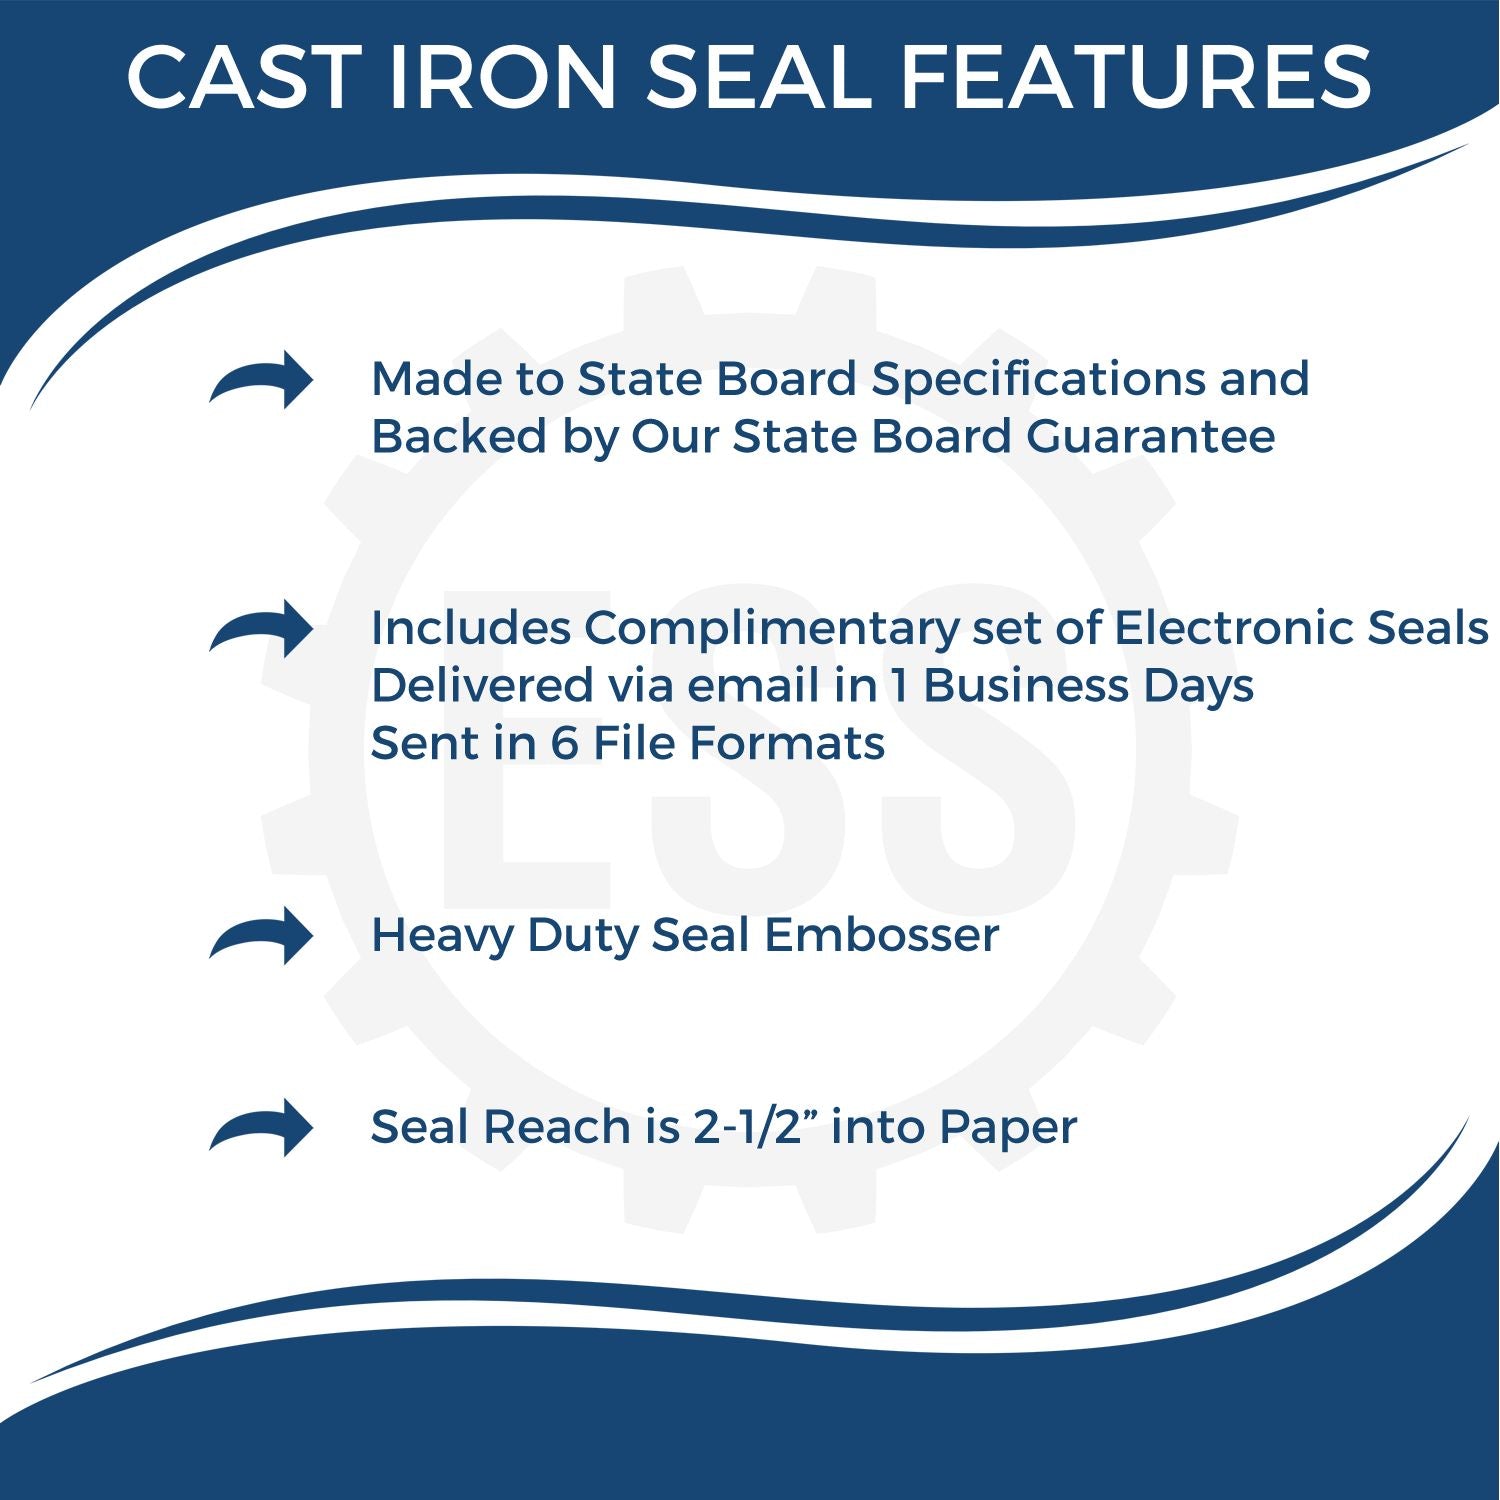 The main image for the Heavy Duty Cast Iron Delaware Engineer Seal Embosser depicting a sample of the imprint and electronic files